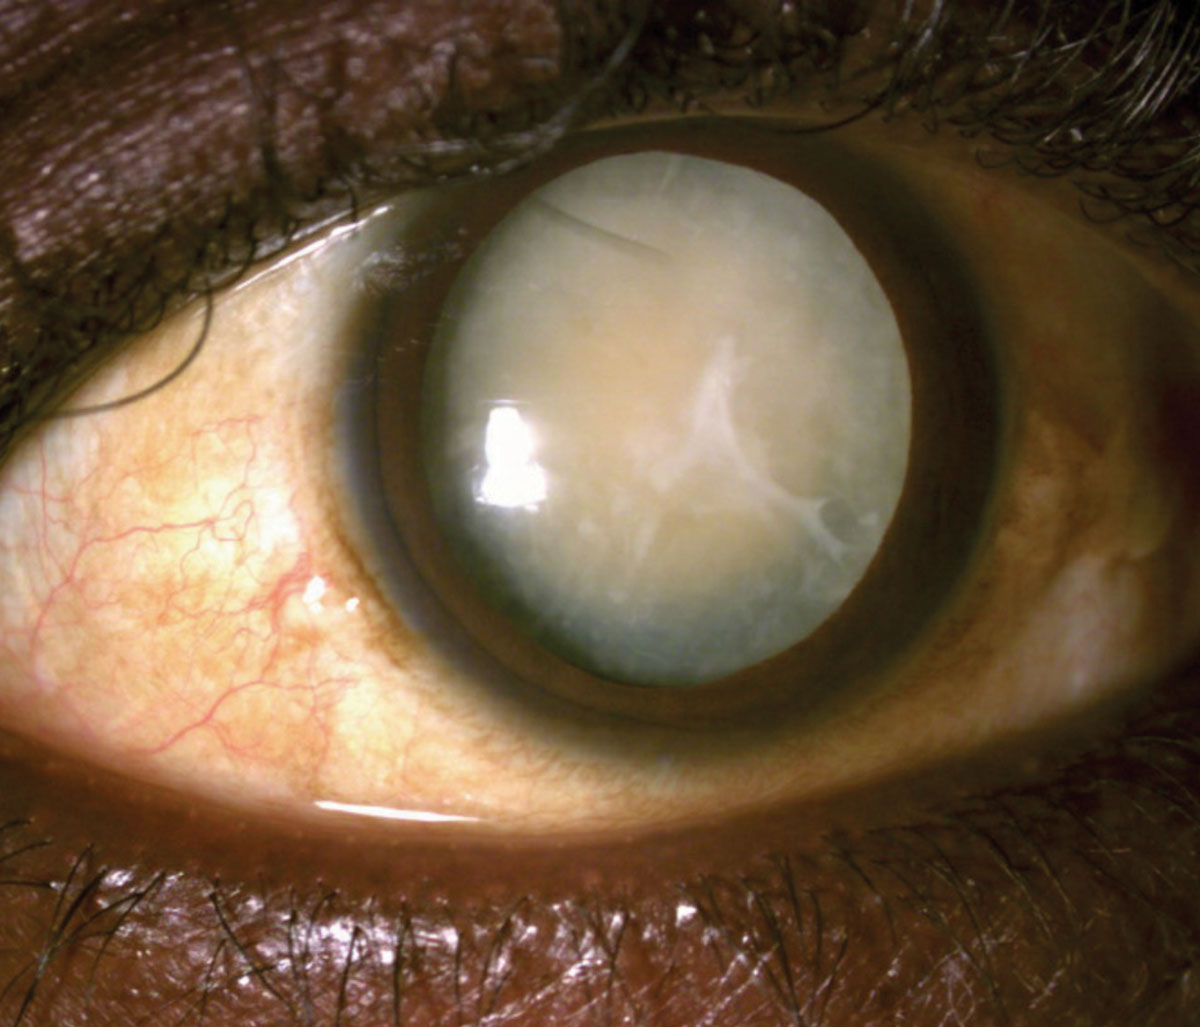 Patients who received cataract surgery noted improvement in photophobia post-op.